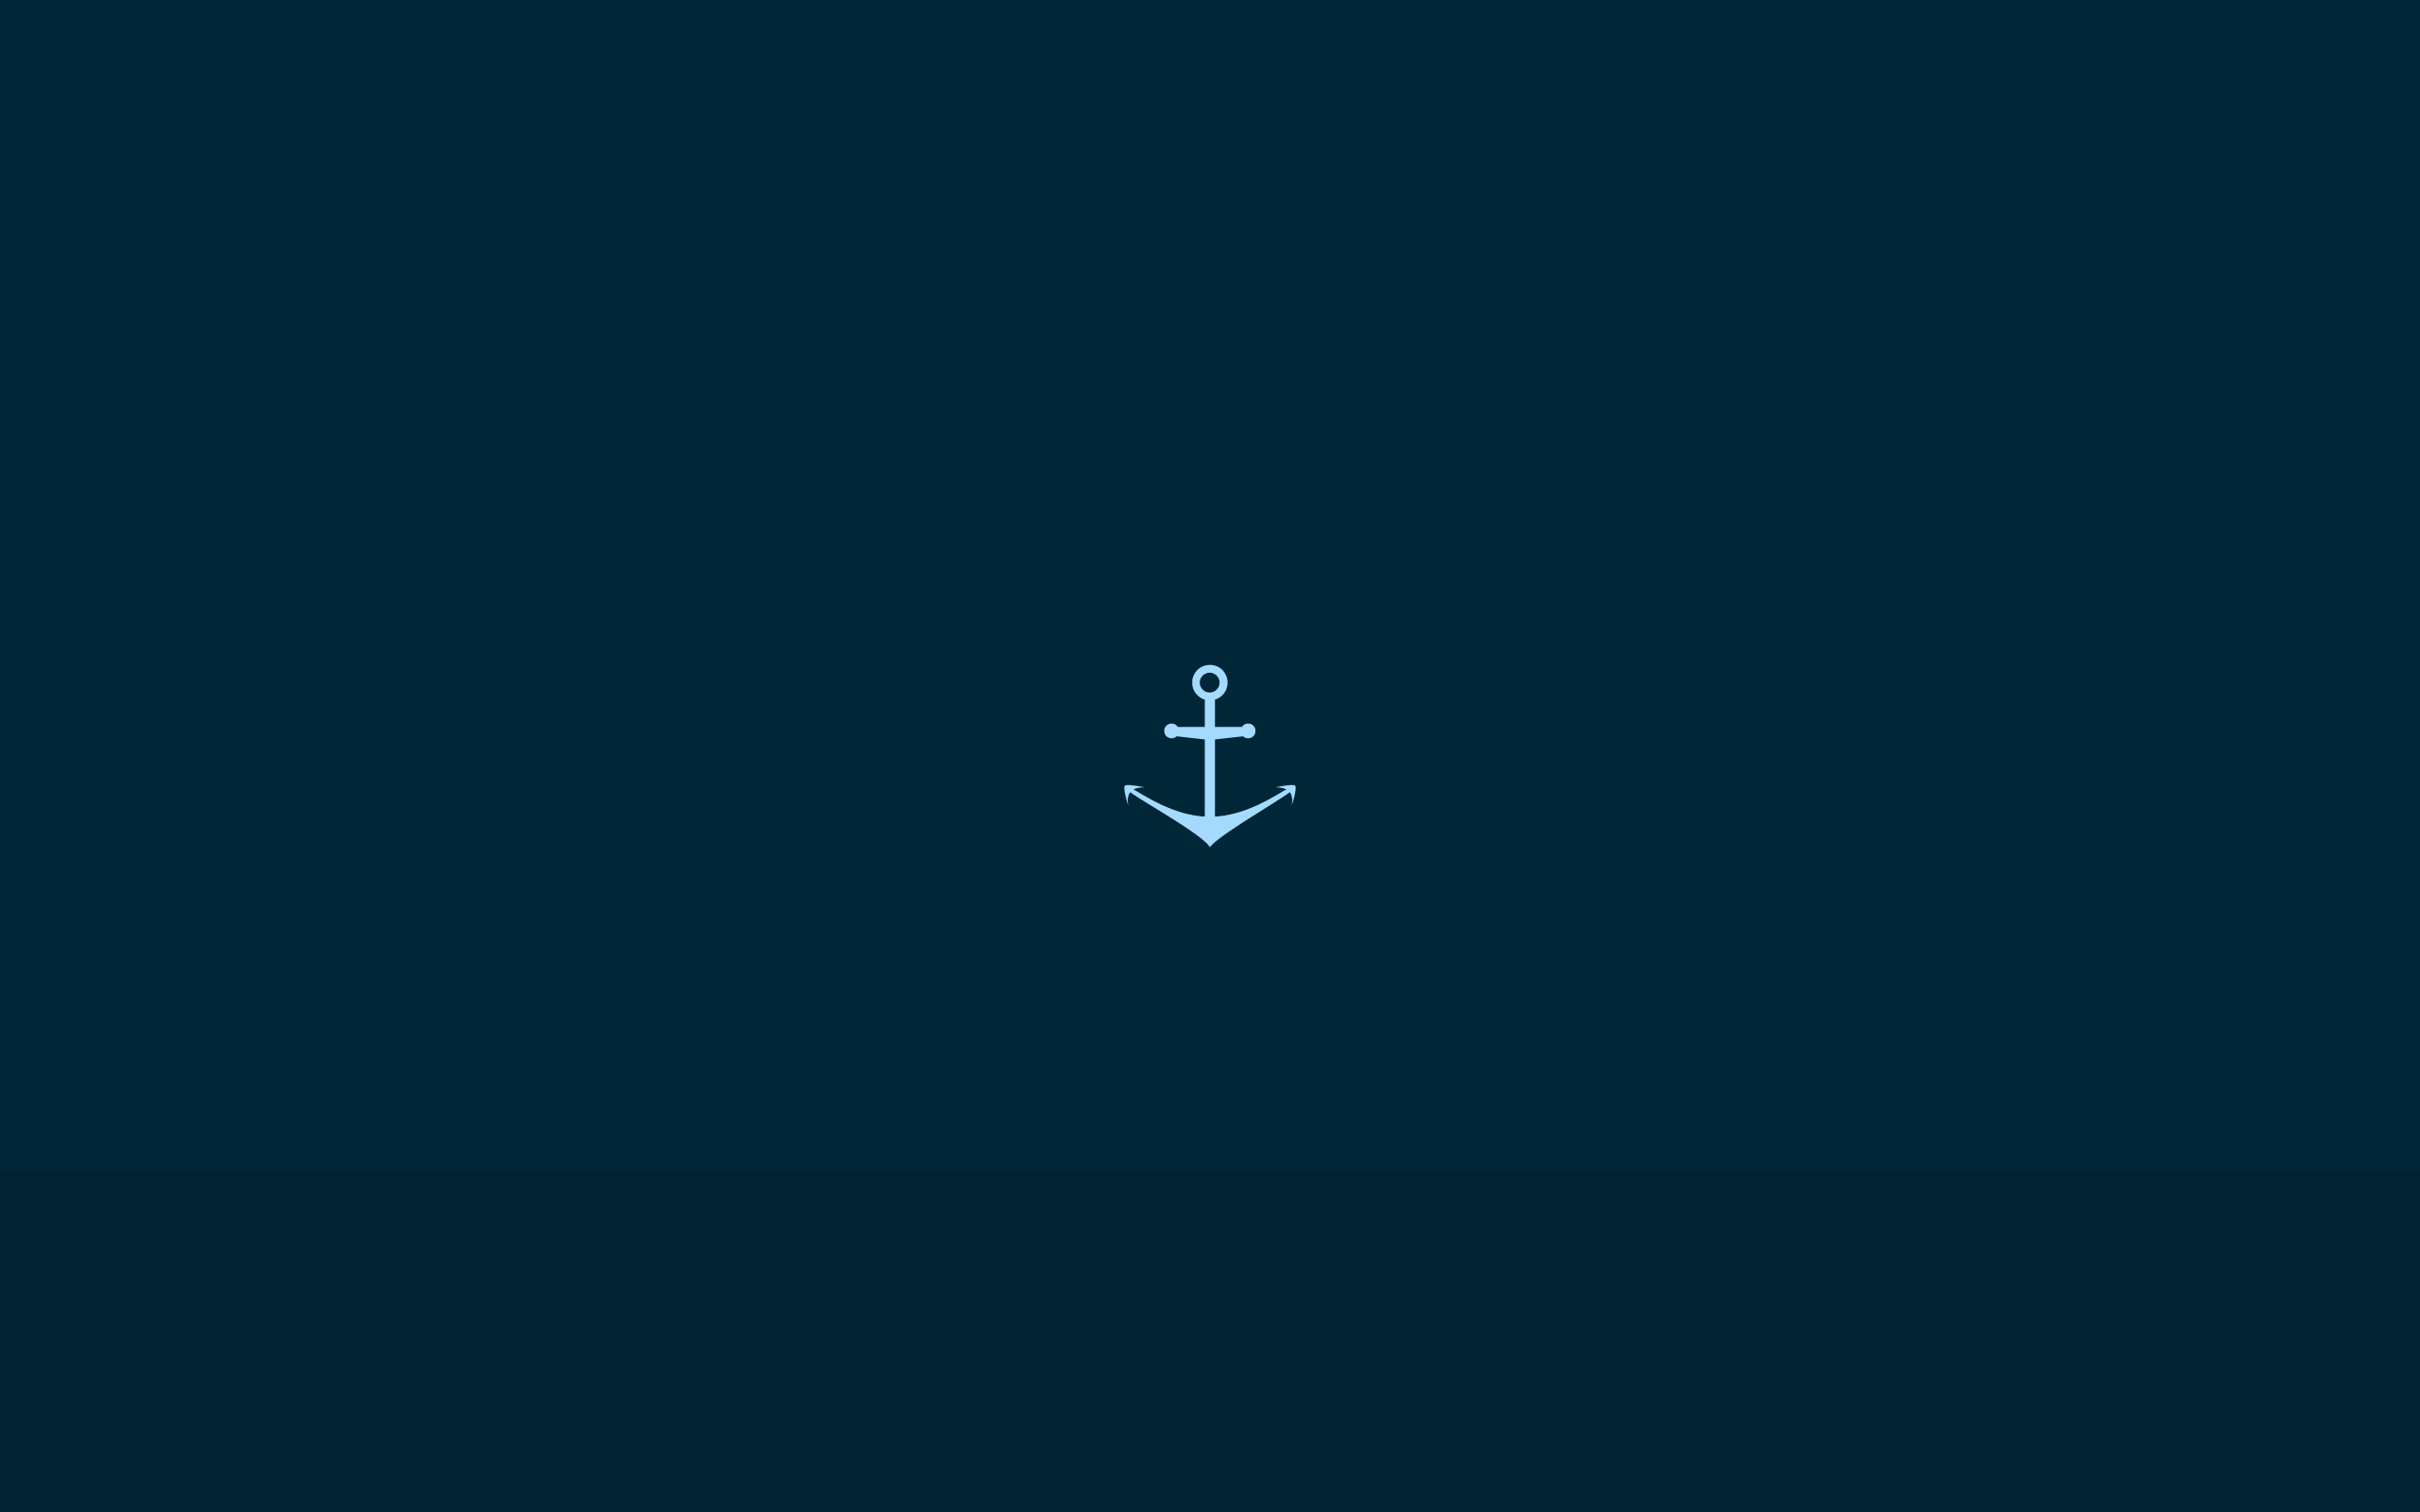 General 2560x1600 blue anchors nautical minimalism simple background